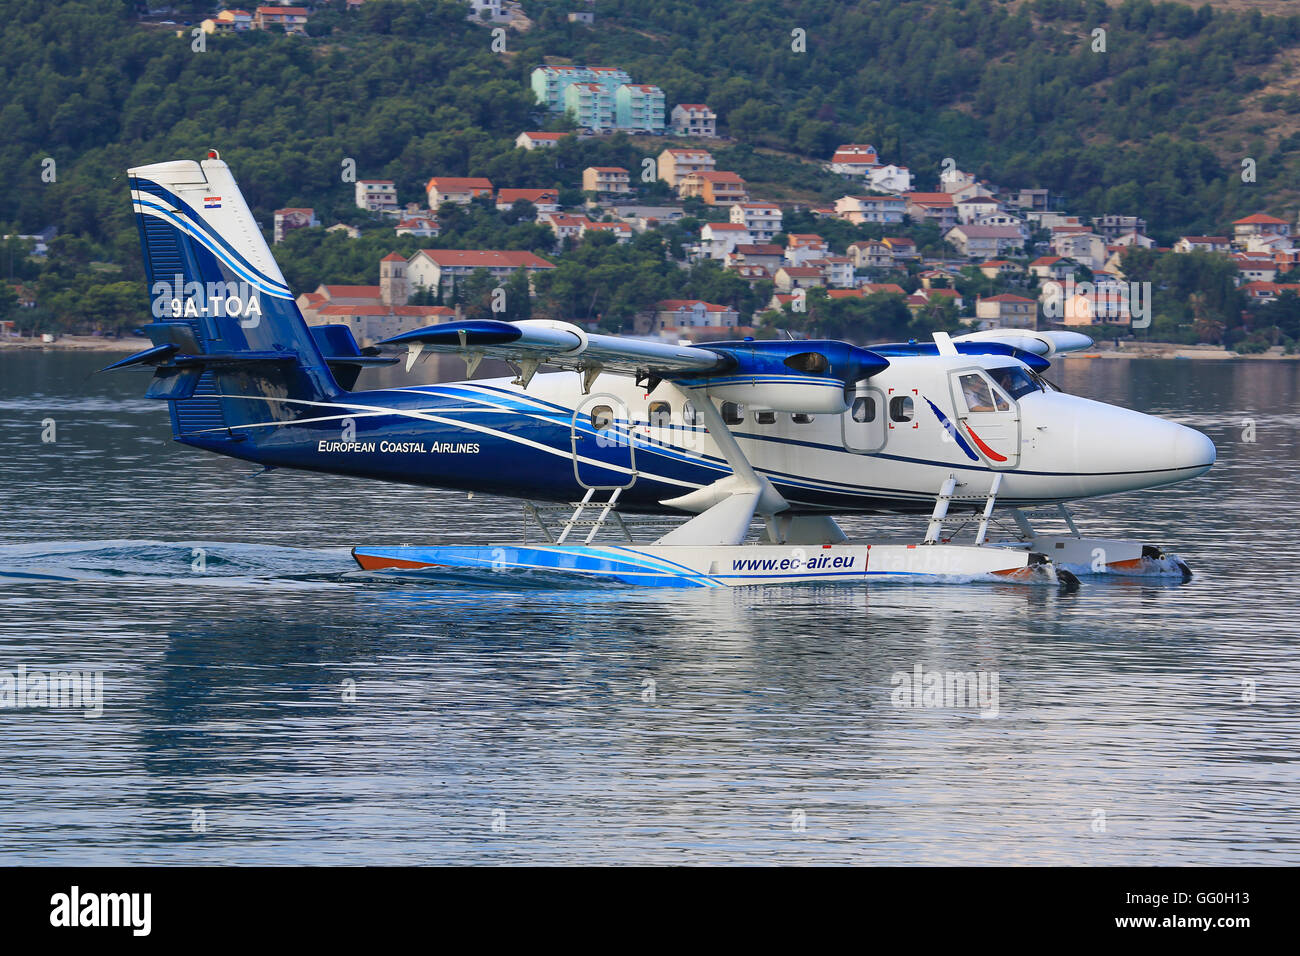 Split/Croatia July 22, 2014: DHC-6 Twin Otter from European Coastal Airlines at Split Airport. Stock Photo